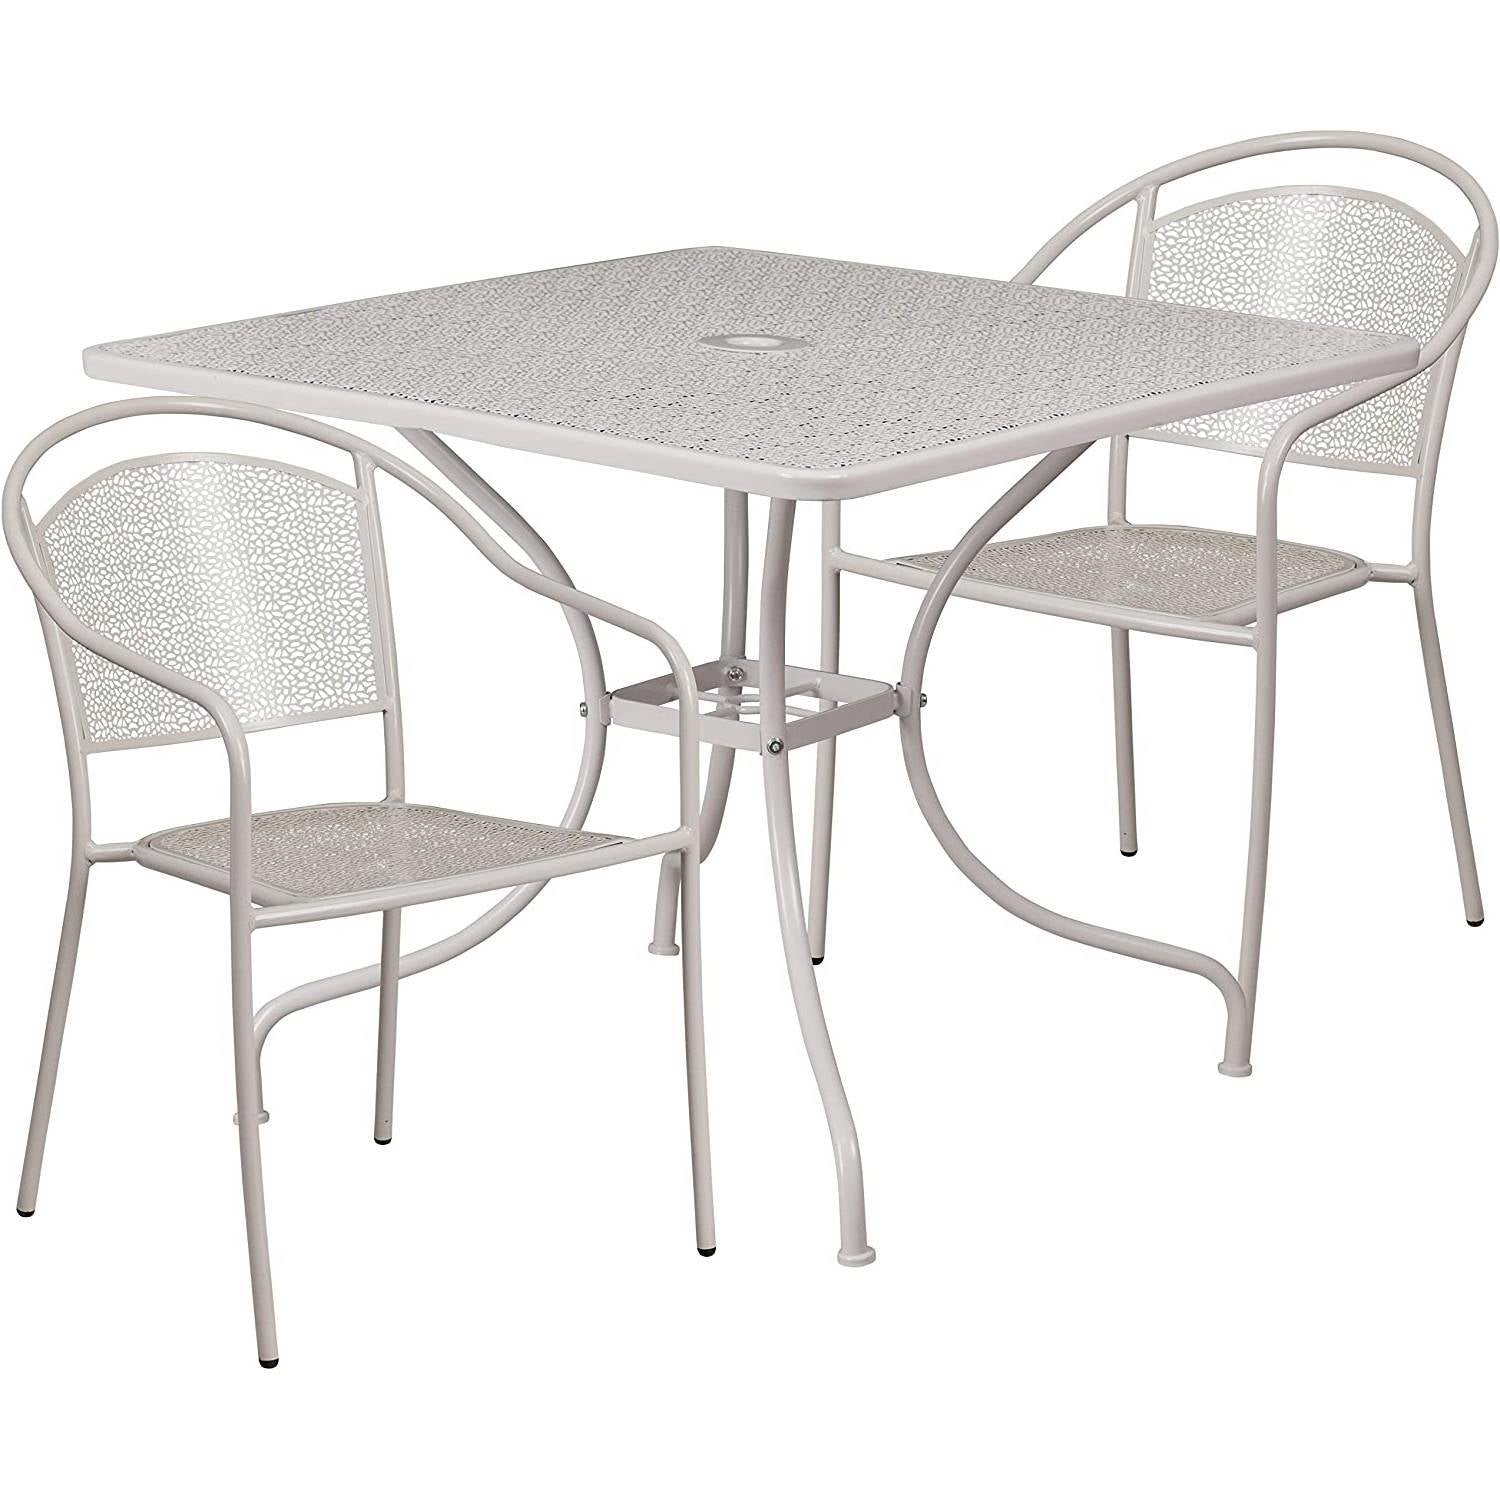 3-Piece Grey Steel Metal Outdoor Patio Furniture Set with 2 Chairs and 1 Table